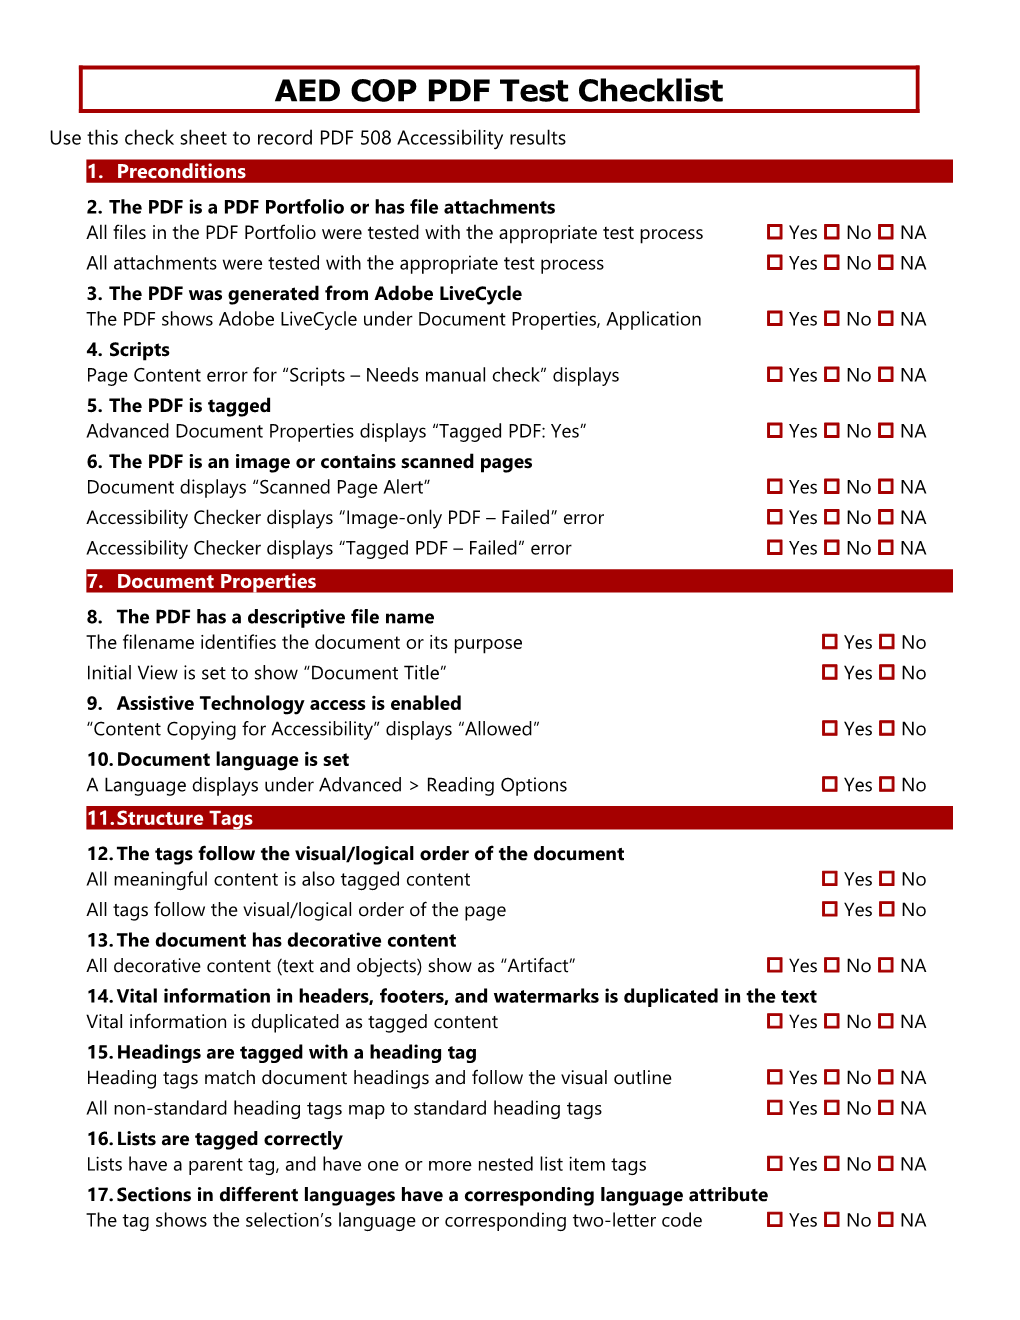 AED COP PDF Test Check Sheet